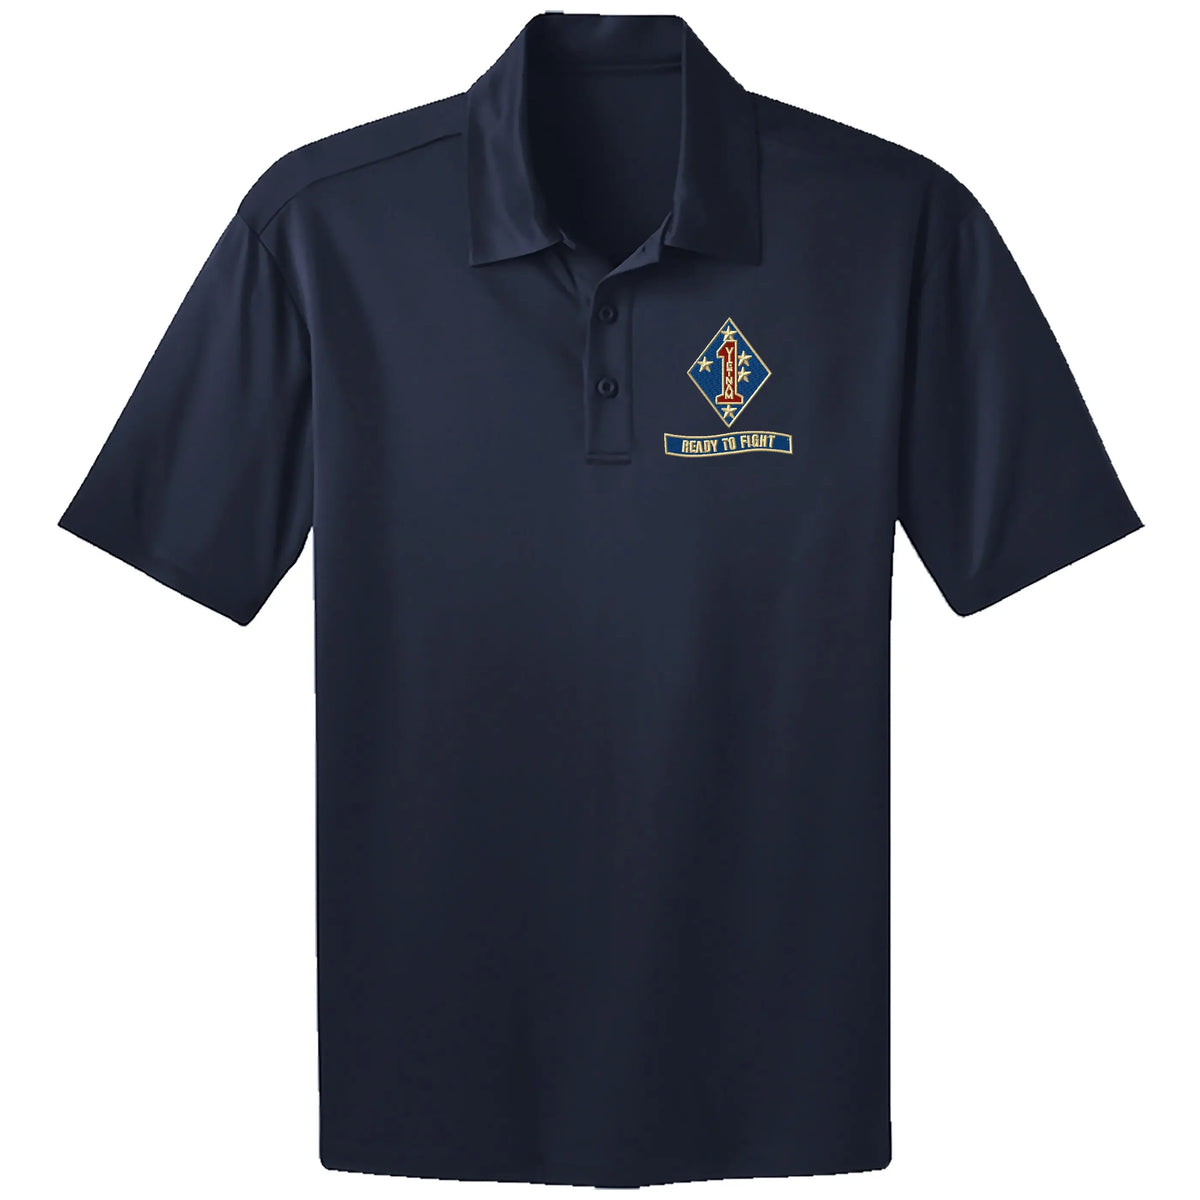 1st Mar Vietnam Div "Ready to Fight" Embroidered Performance Polo